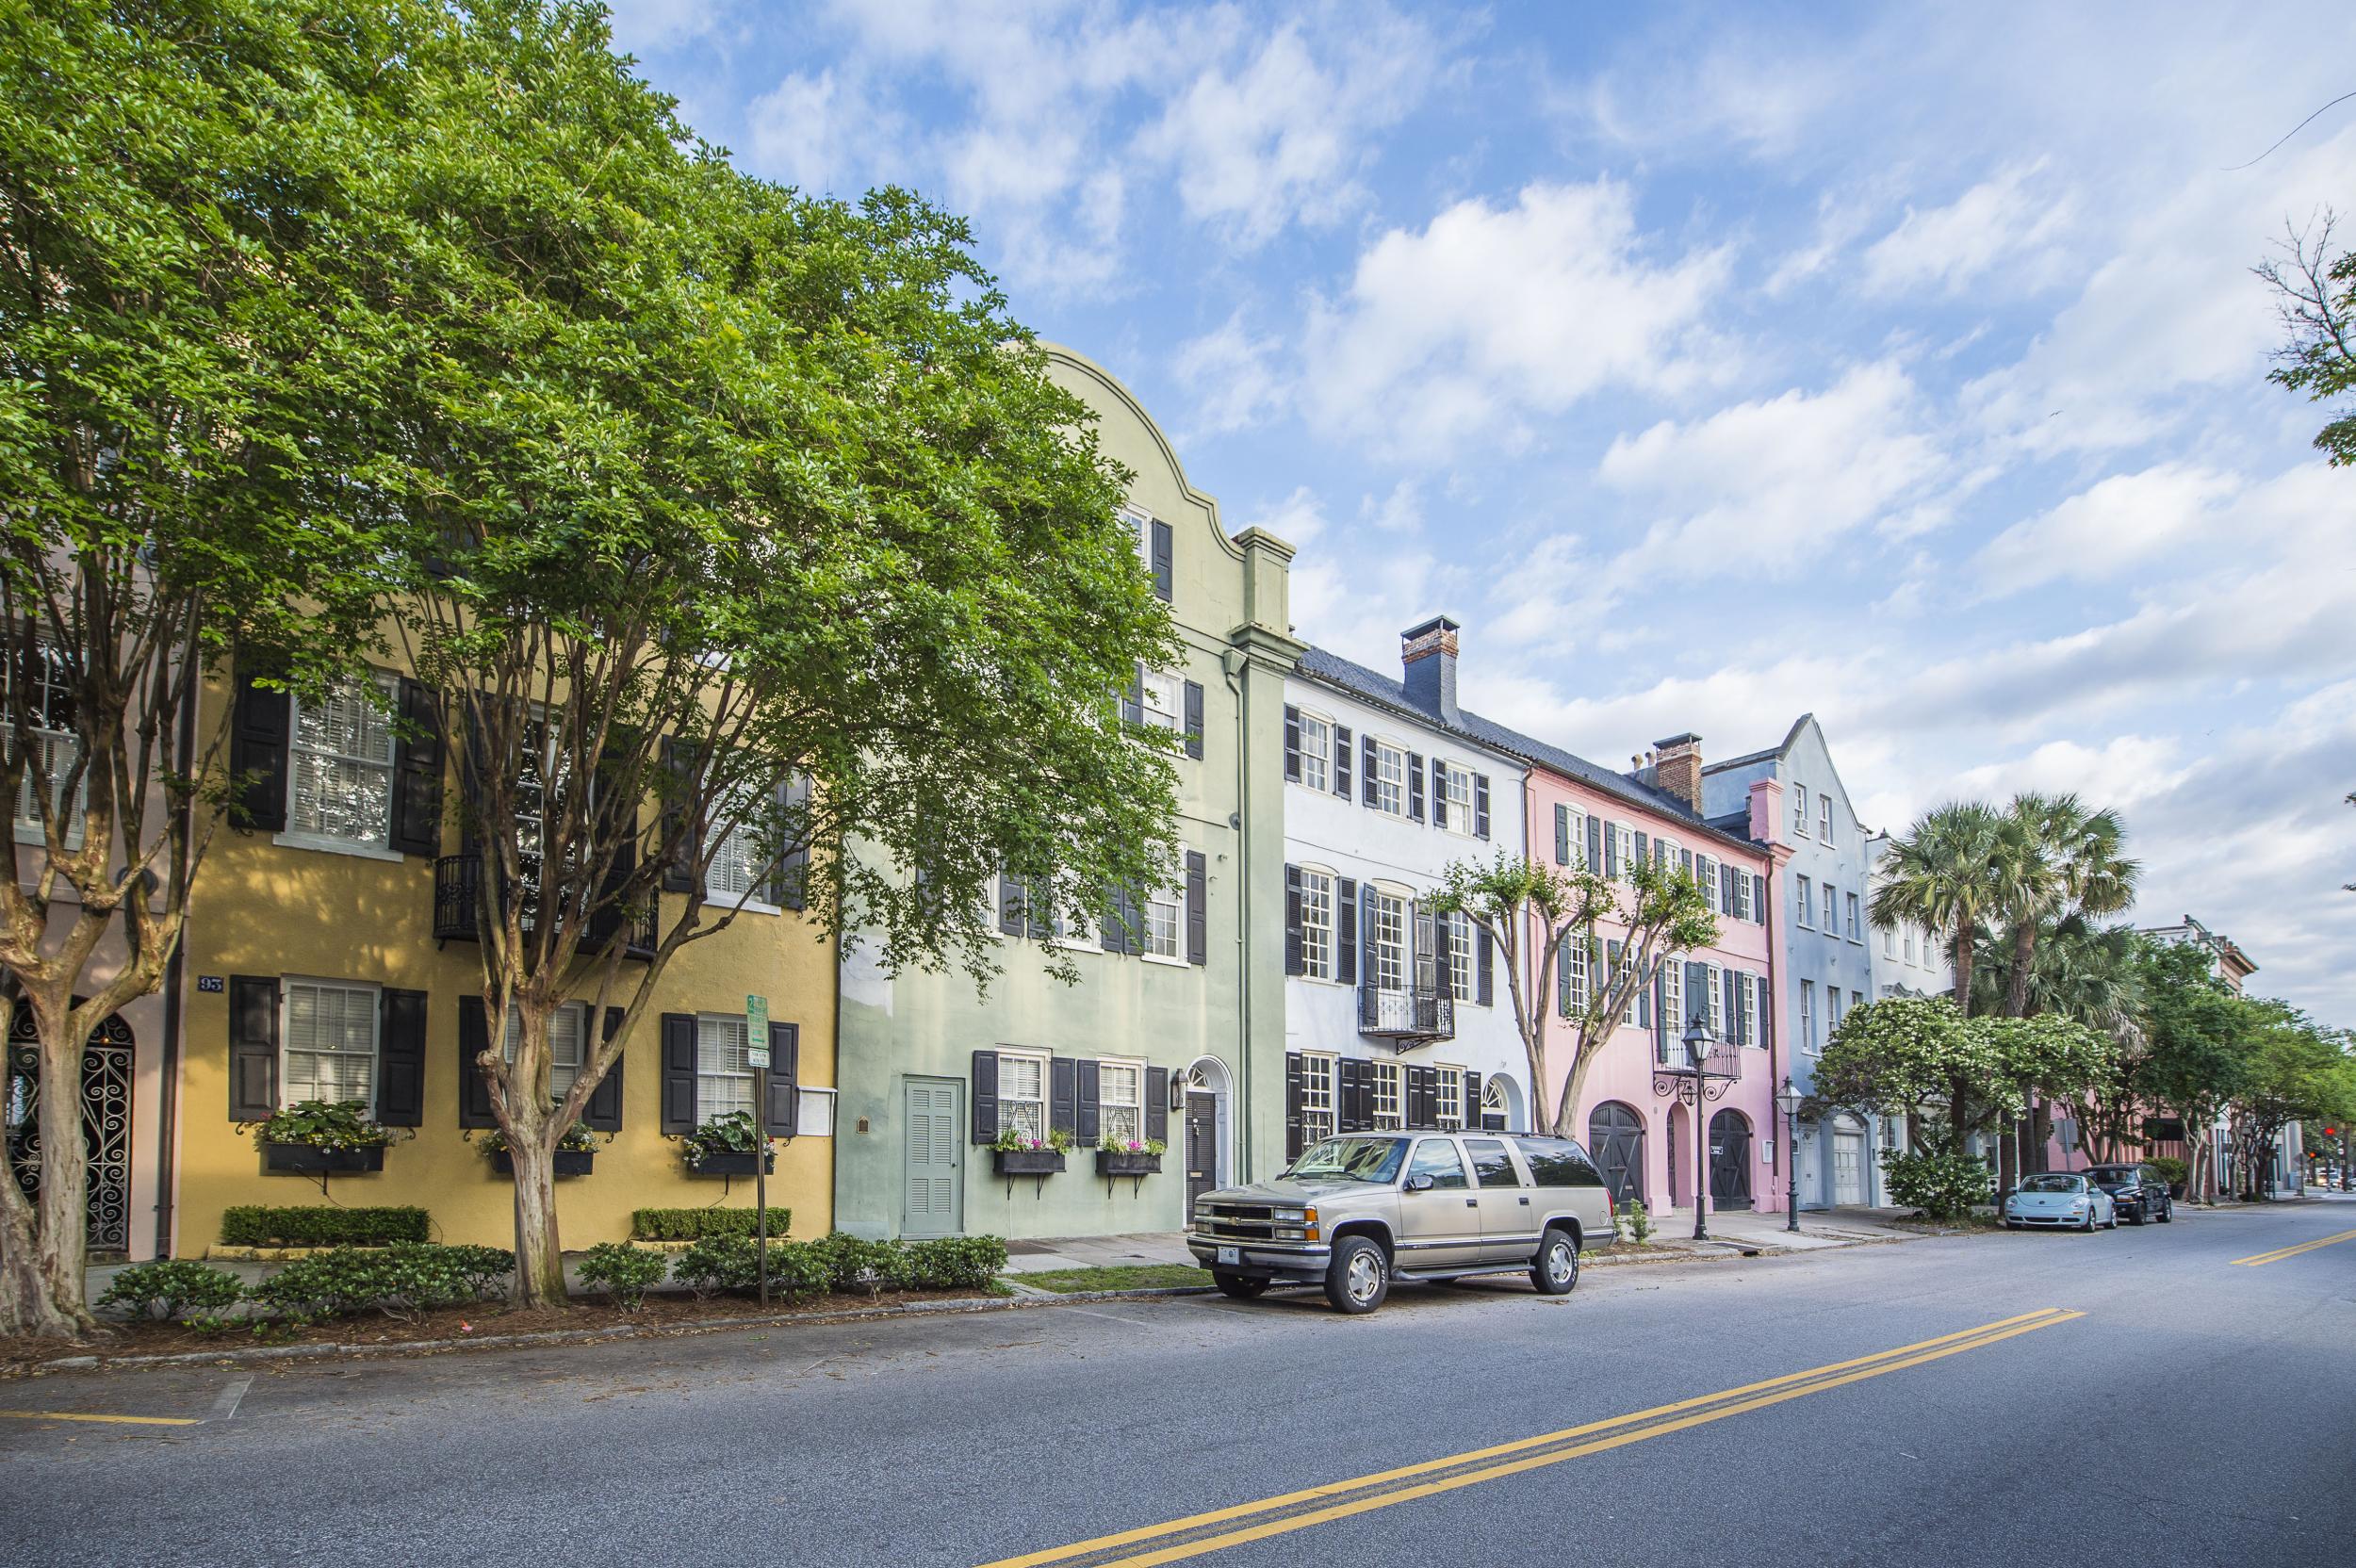 Pastel mansions in downtown Charleston